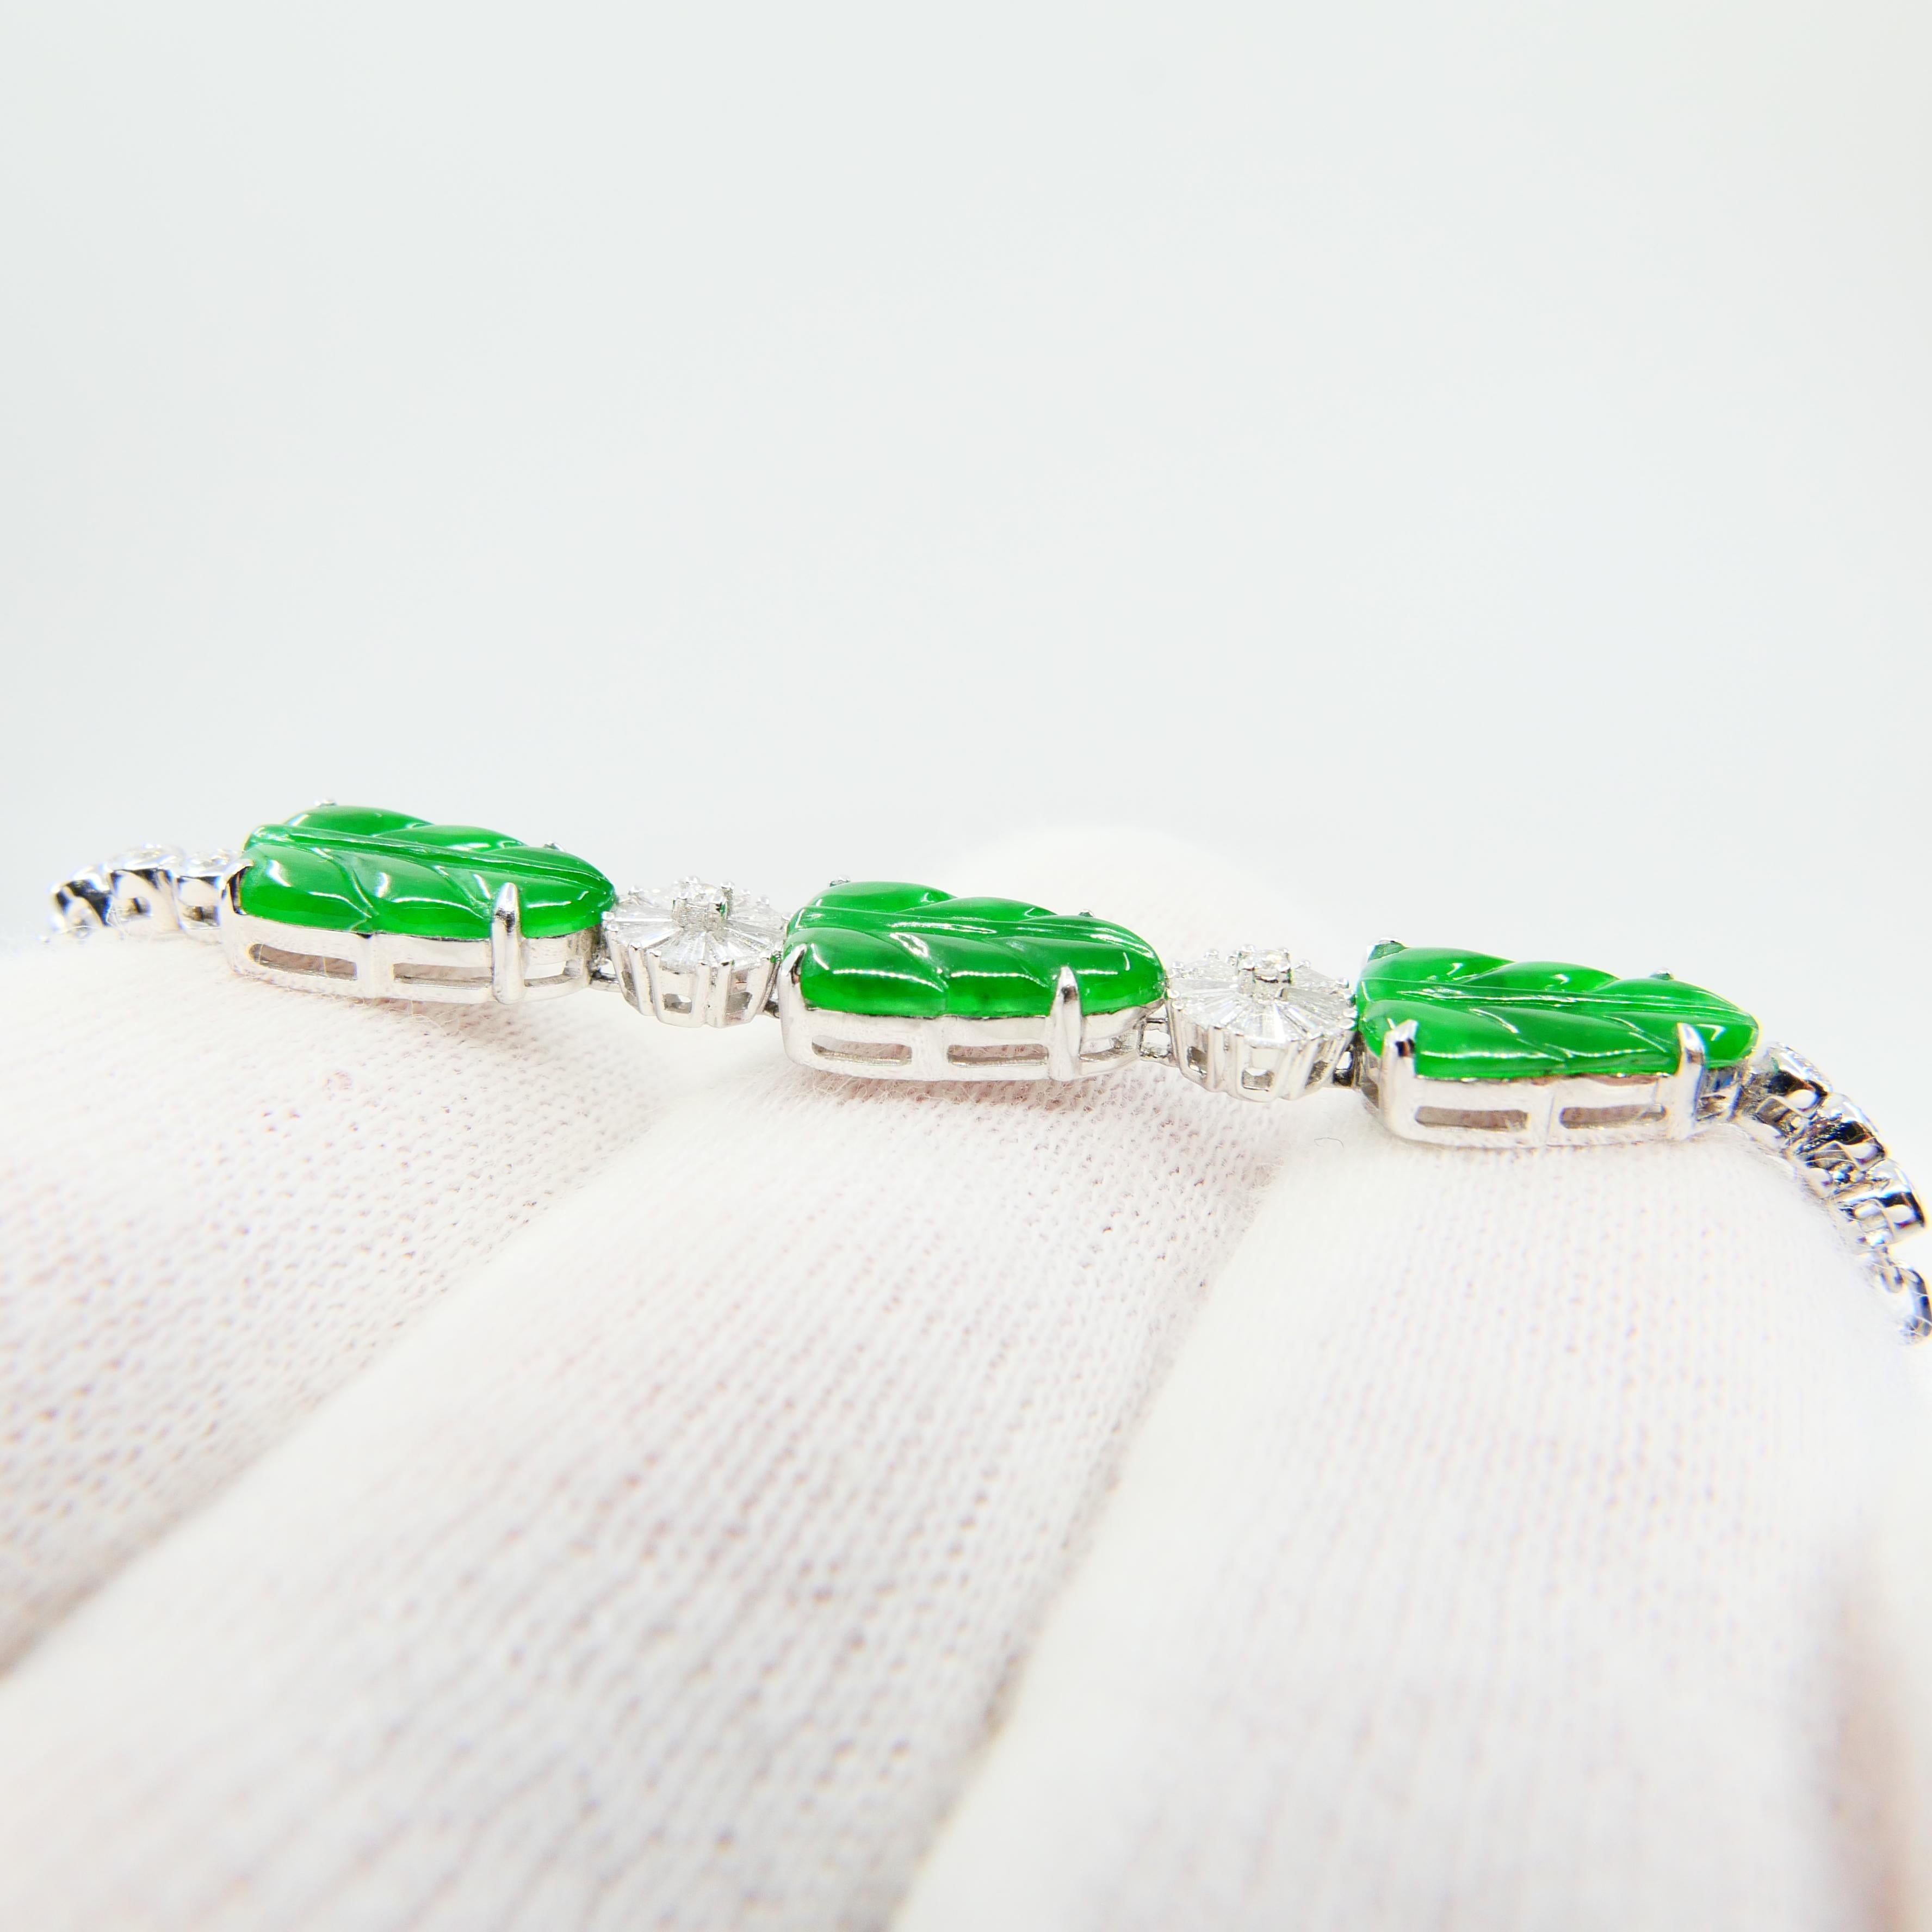 Certified Icy Apple Green Jade and Diamond Bracelet, Borderline Imperial Green For Sale 4